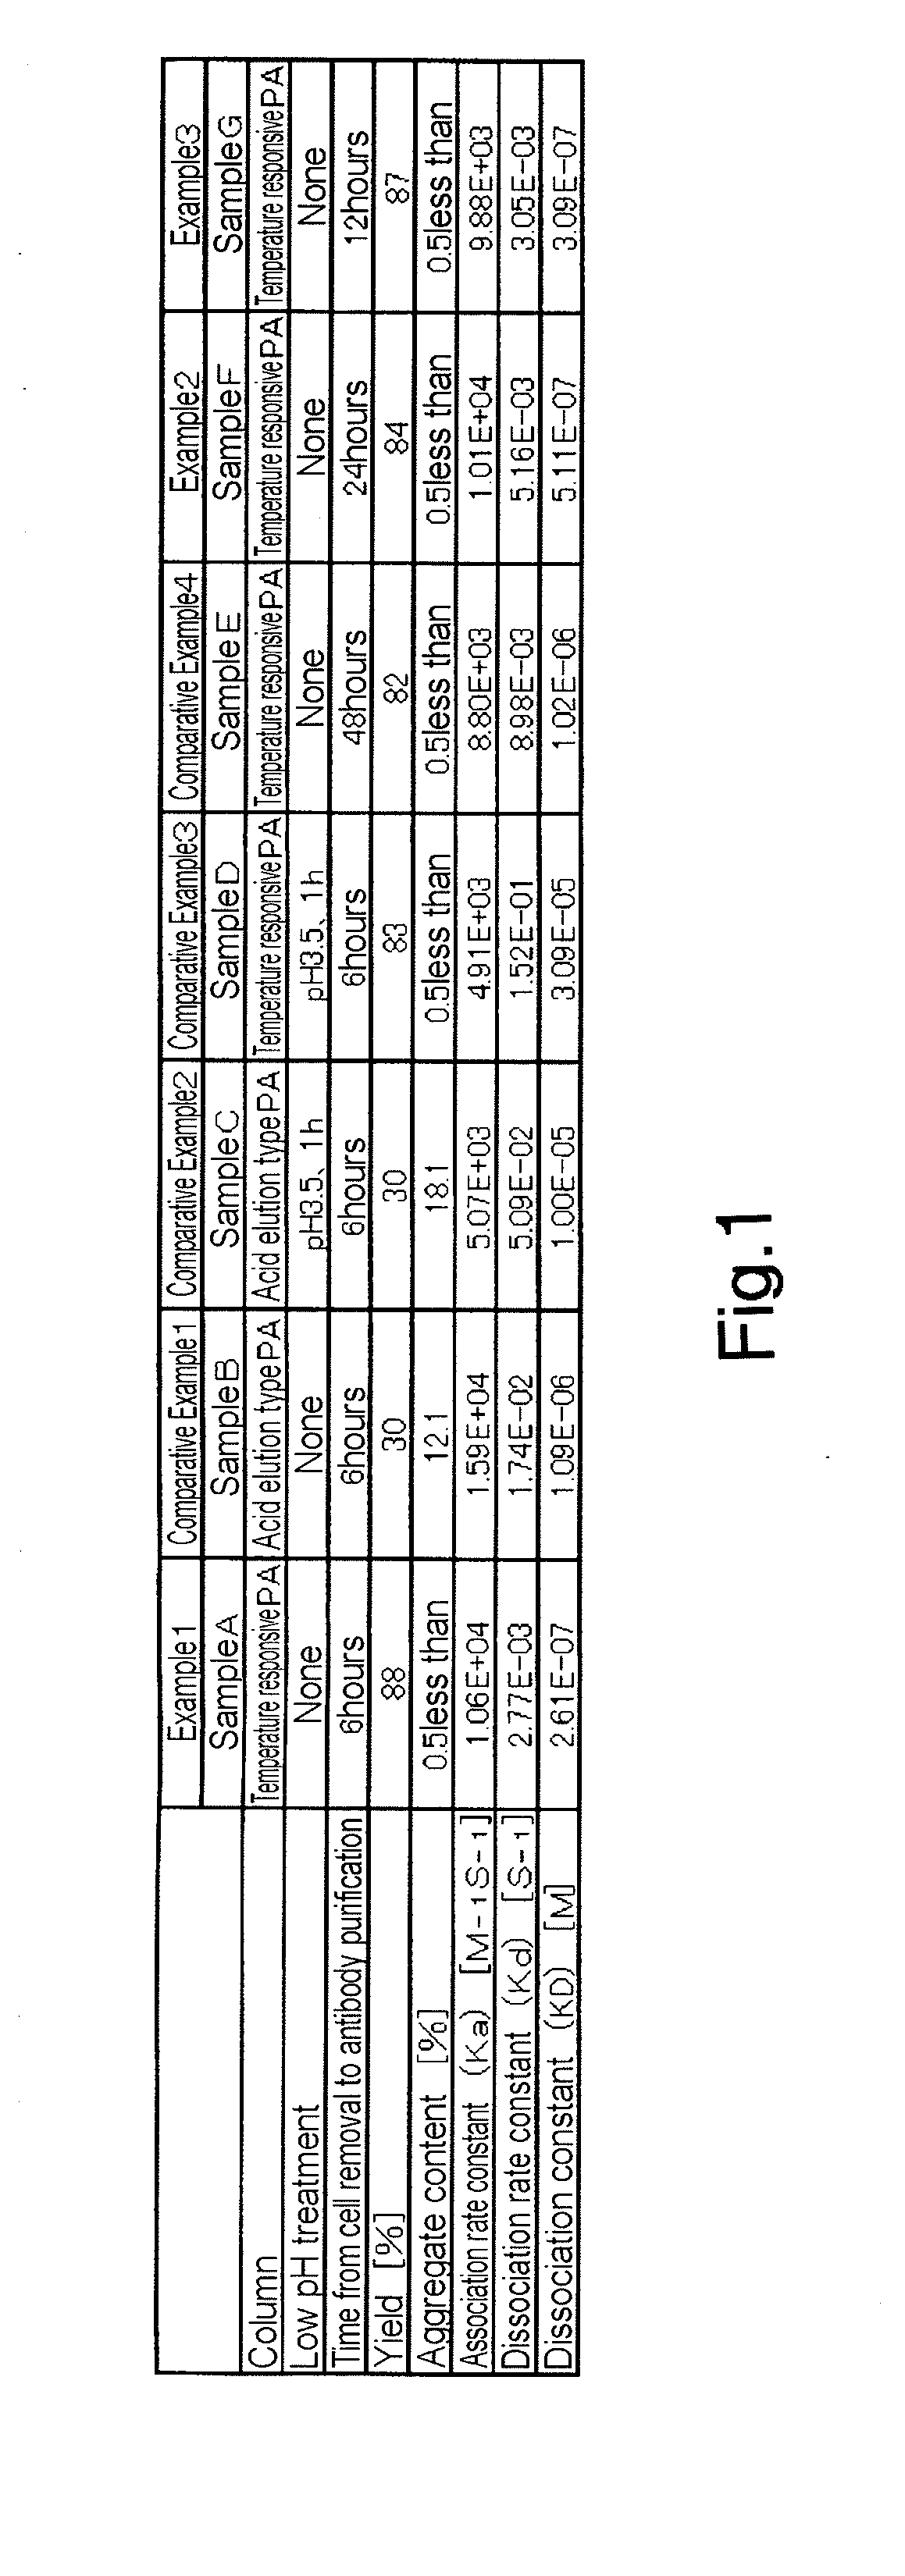 High-affinity antibody and method for manufacturing the same